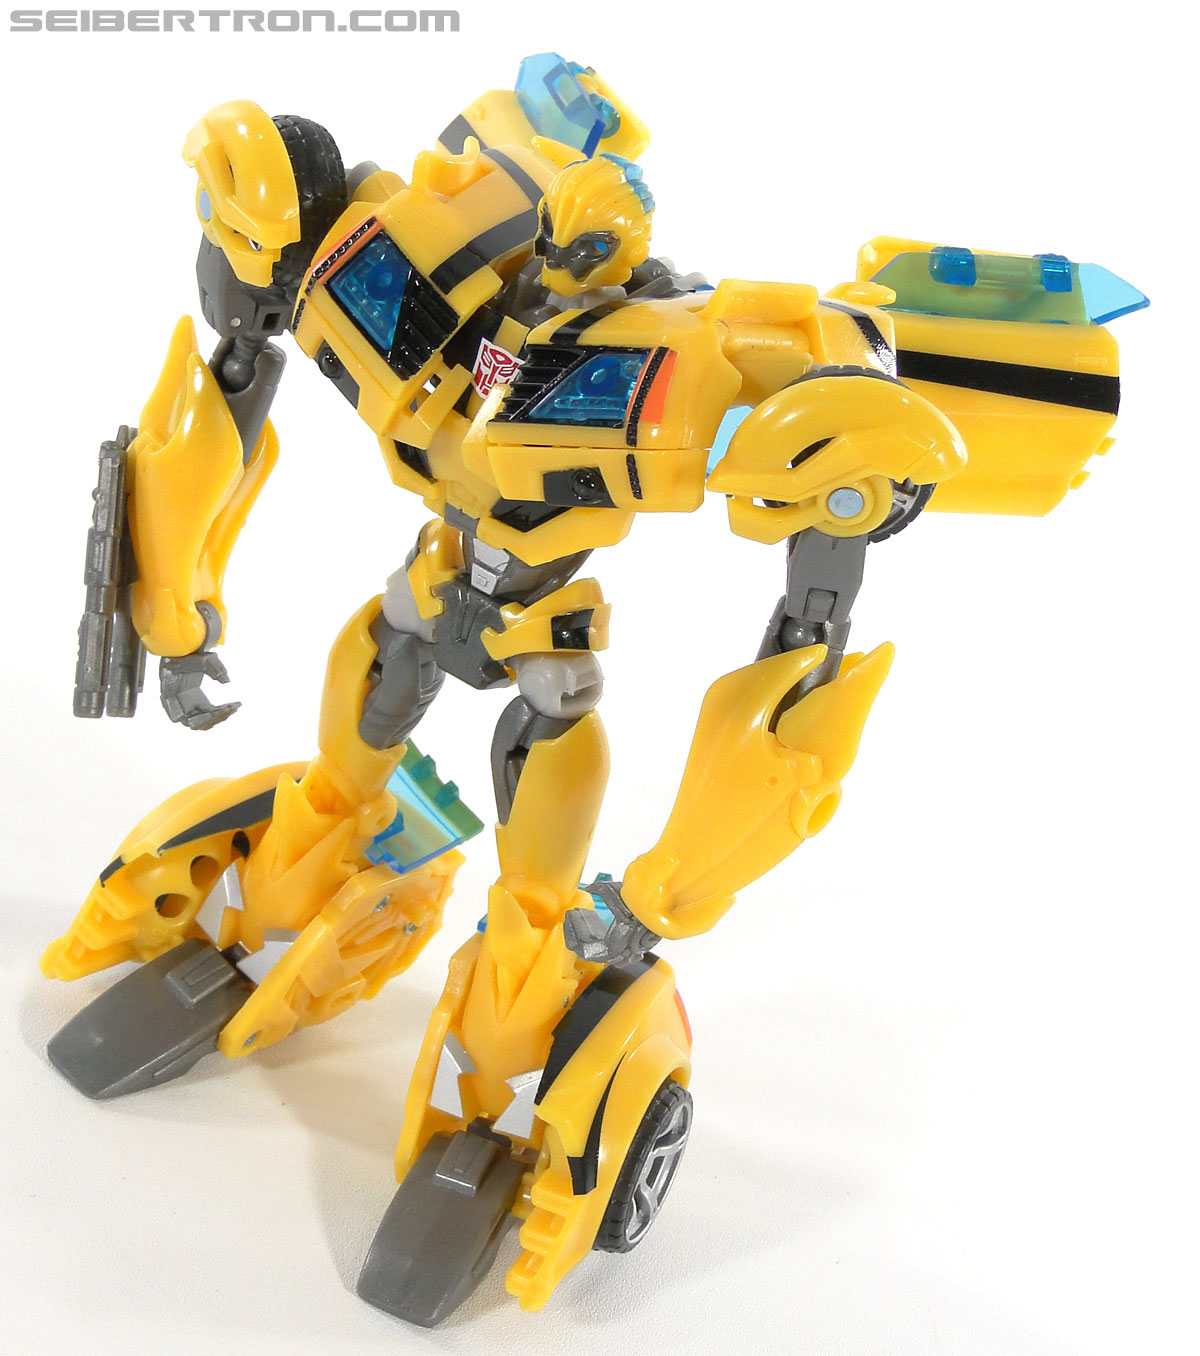 Transformers Prime: First Edition Bumblebee (Image #66 of 130)